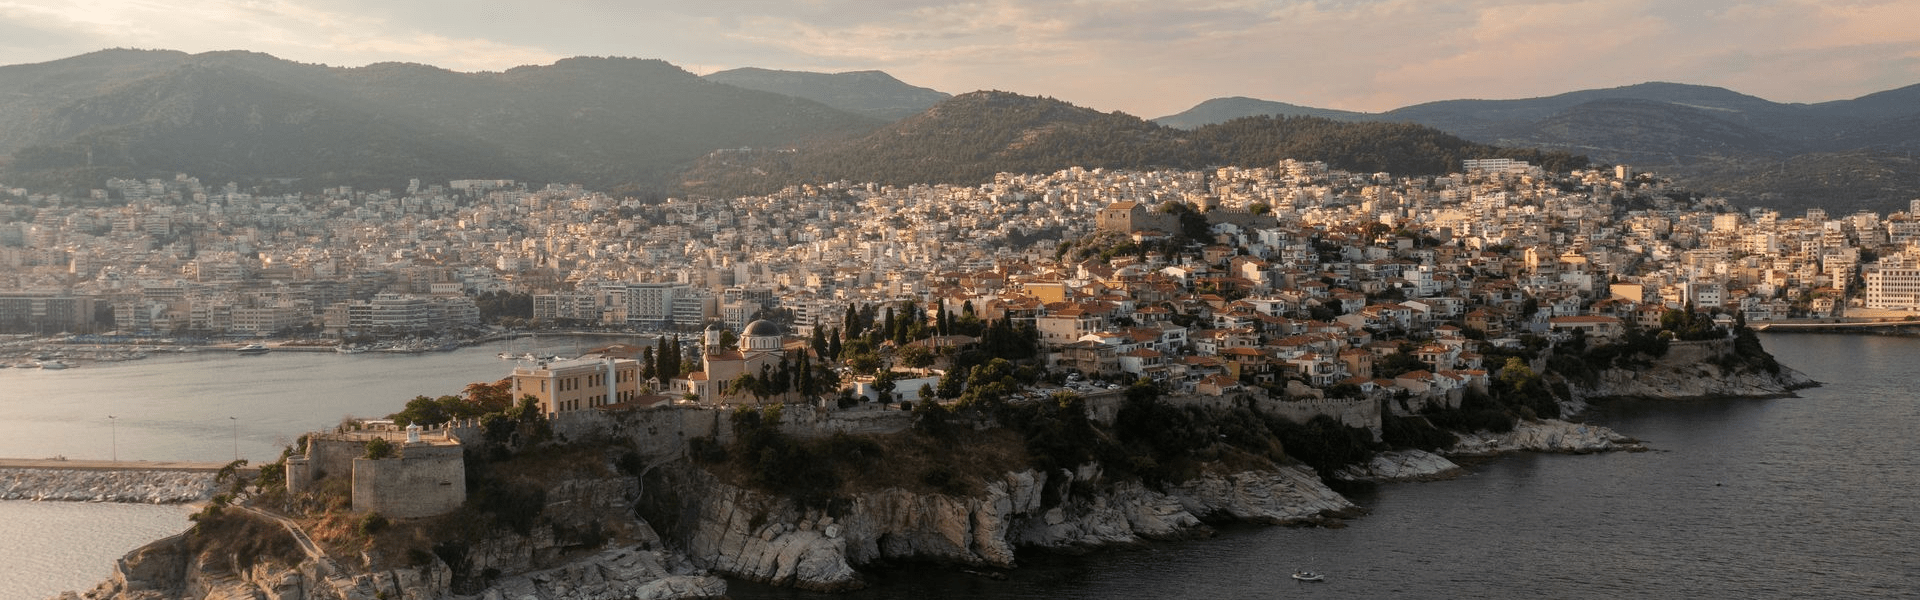 Aerial view of Kavala's old town